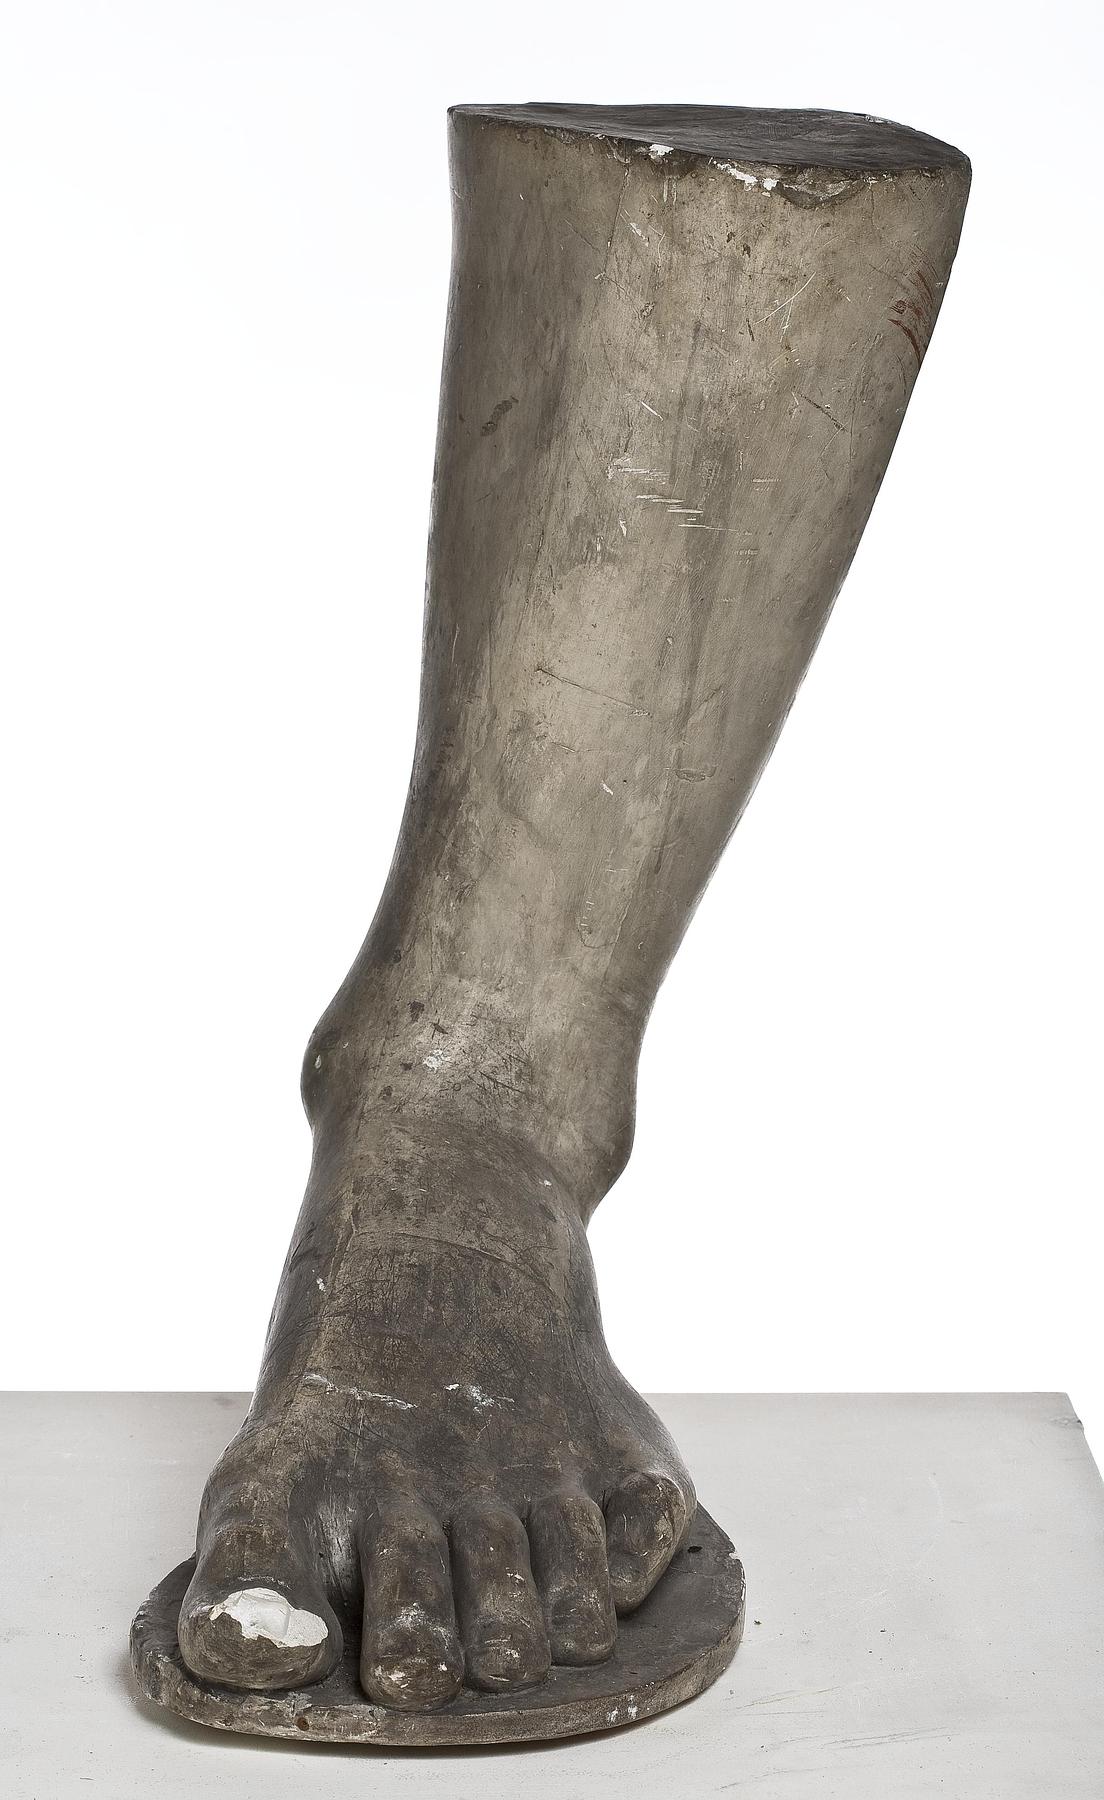 The left foot of Antinous Braschi, L73a